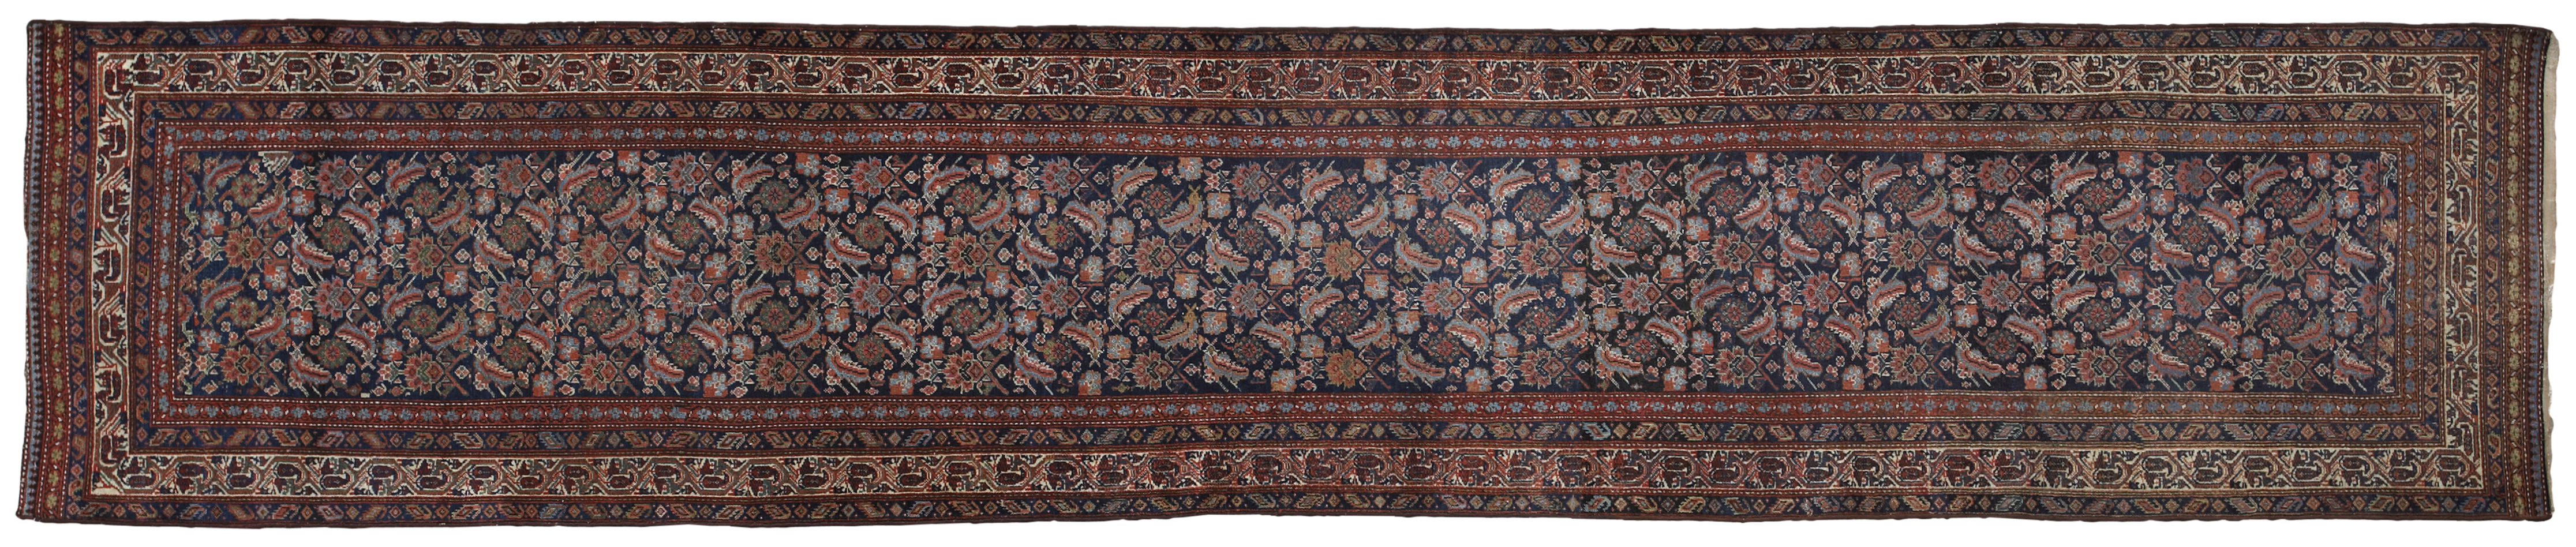 A Malayer runner size approximately